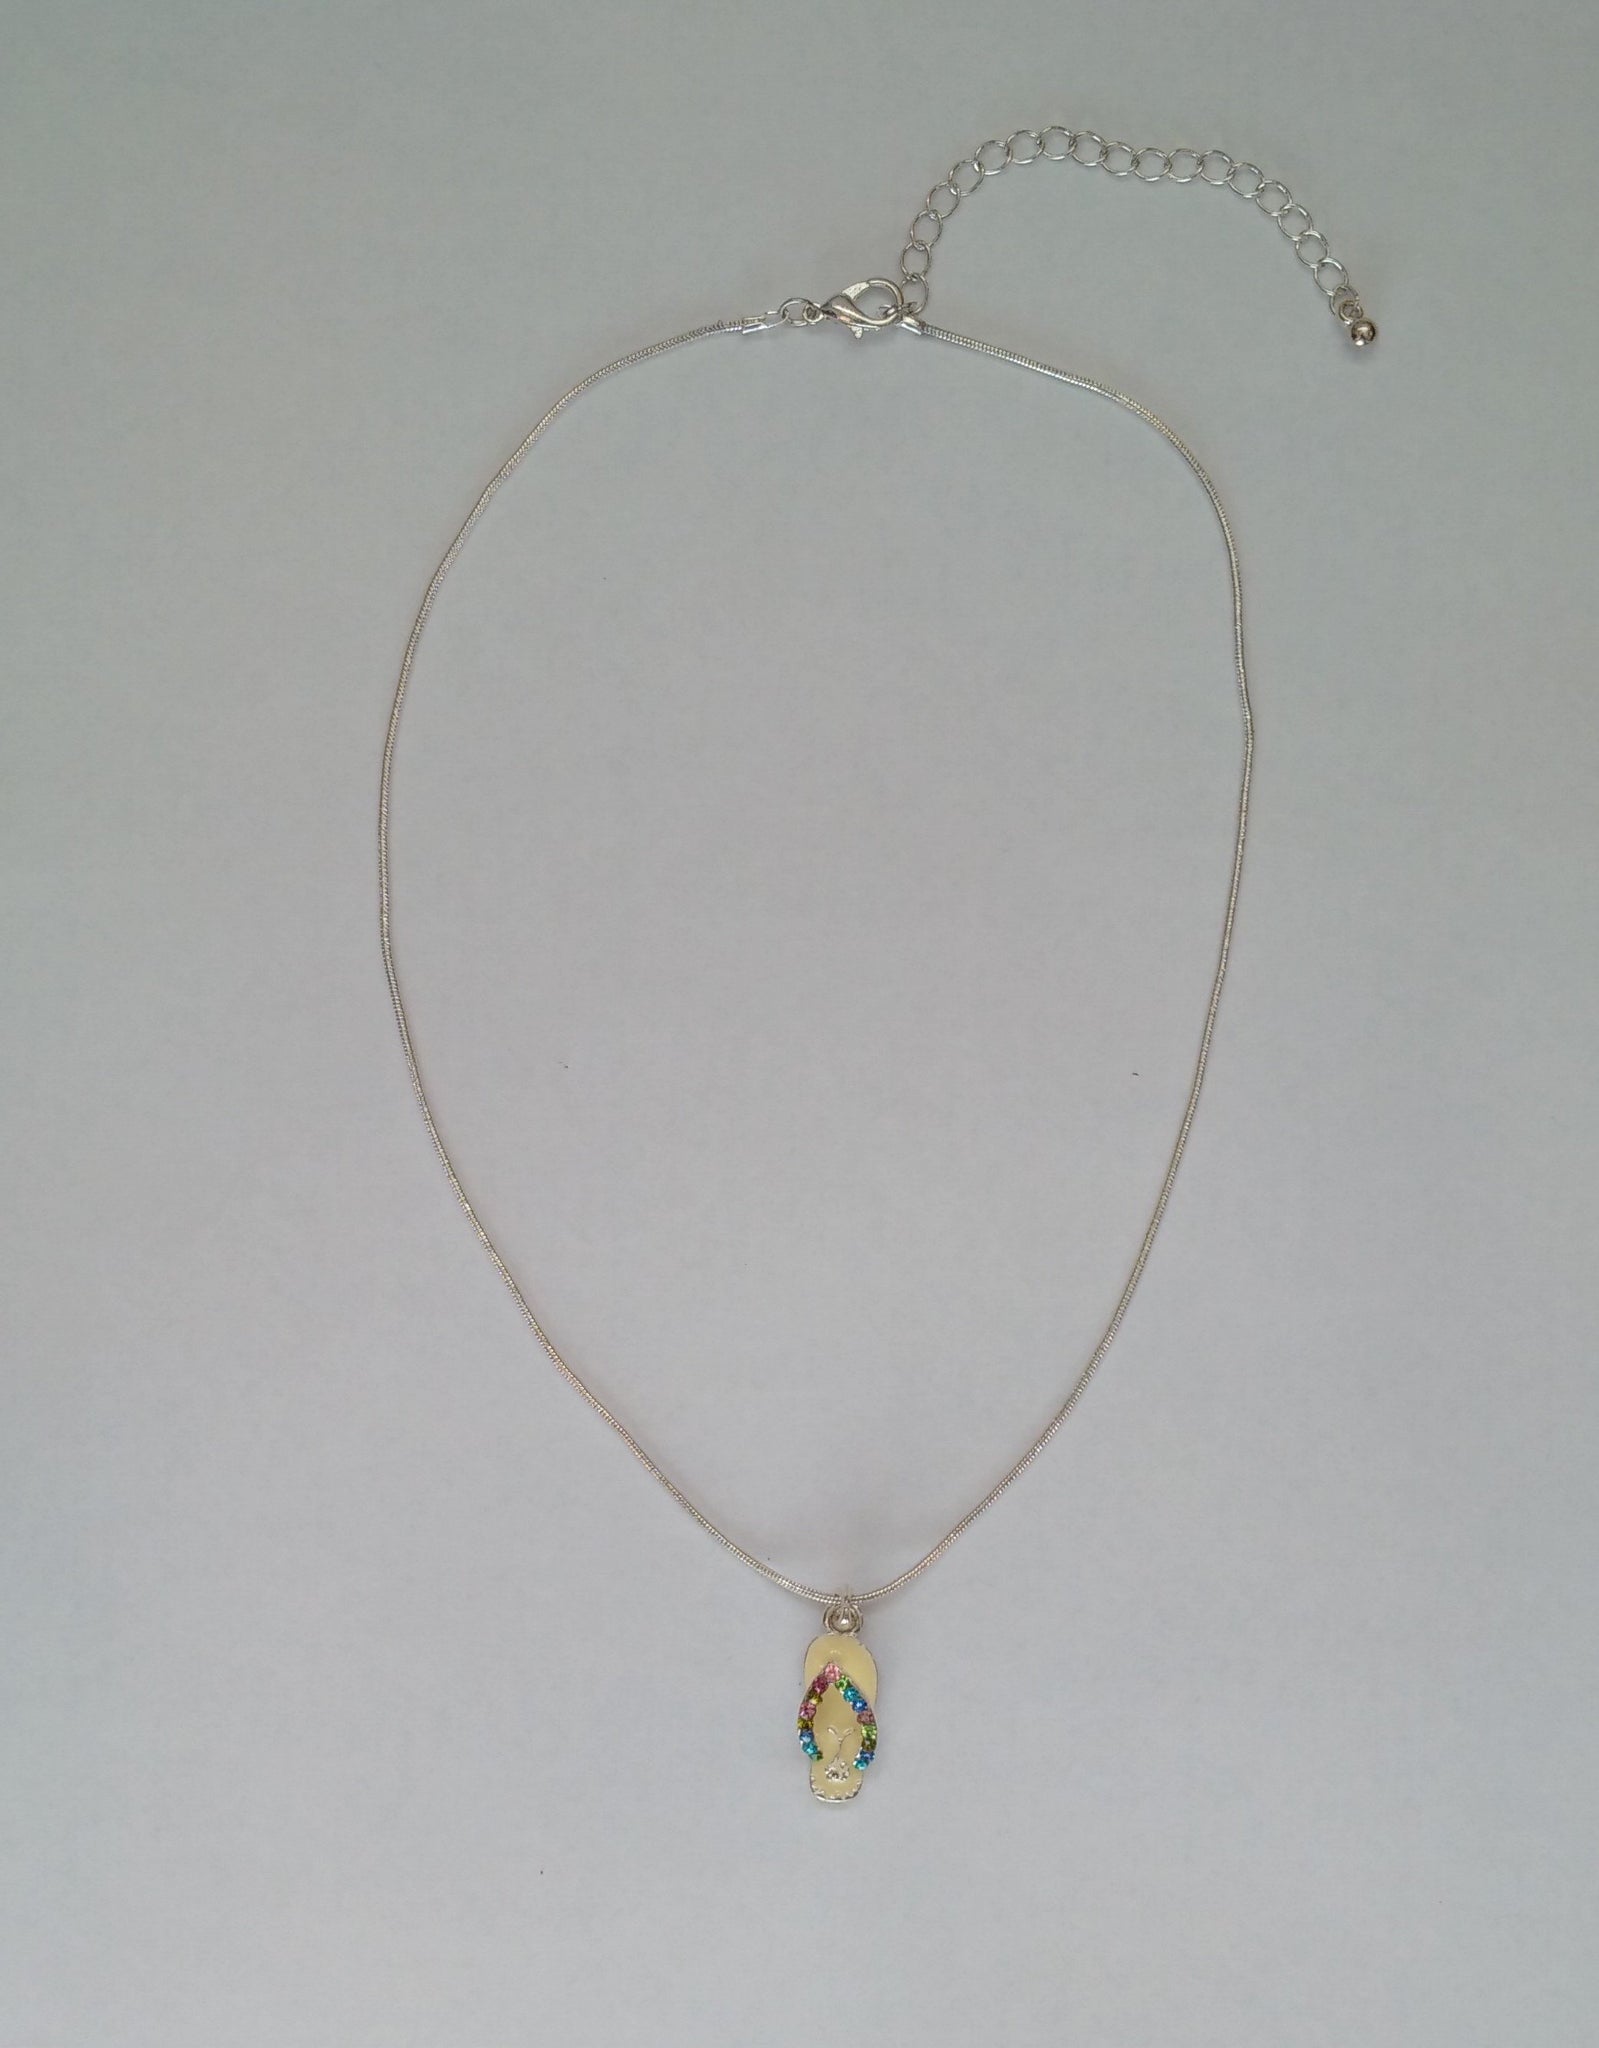 Yellow Flip-flop Design Silver Necklace - Stockpoint Apparel Outlet